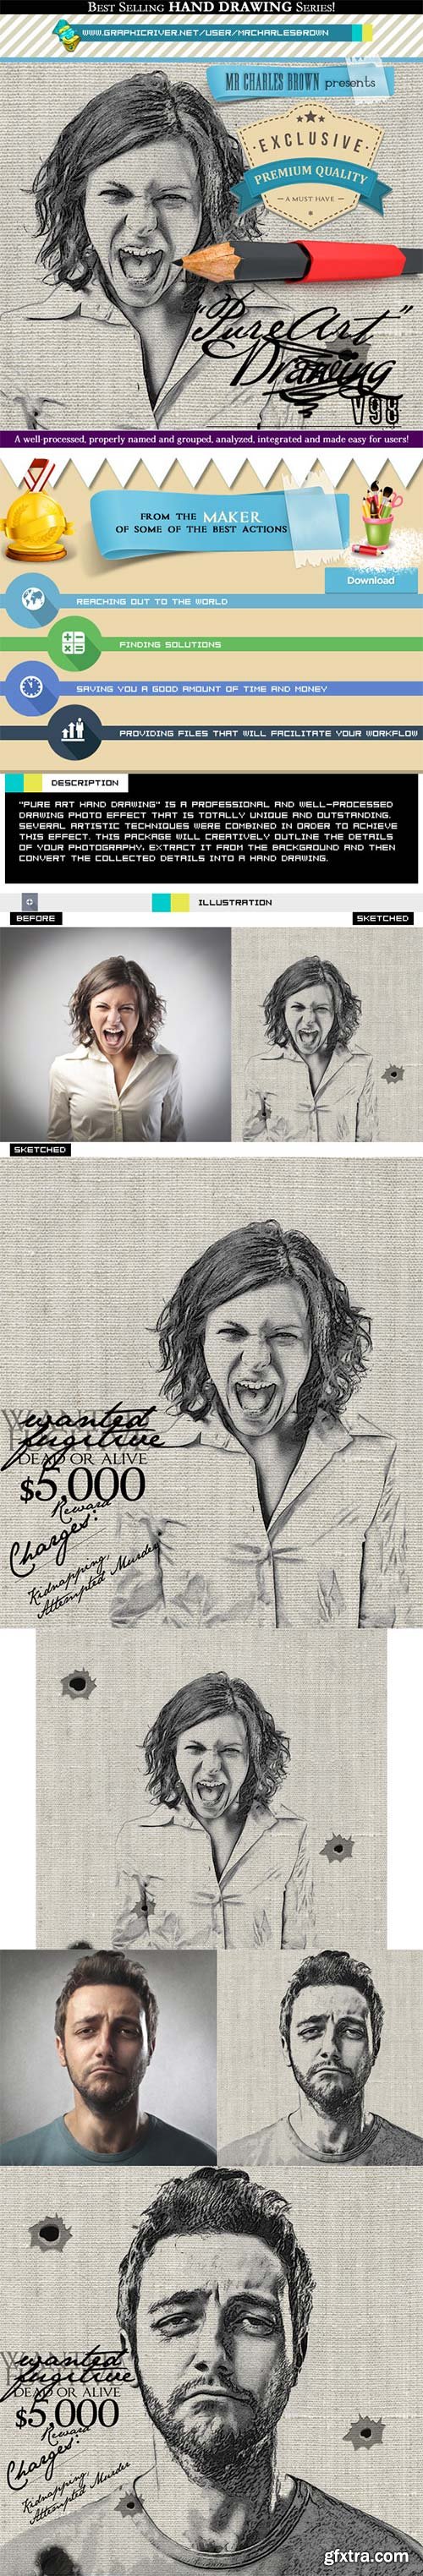 GraphicRiver - Pure Art Hand Drawing 98 – Wanted Dead or Alive 8627690